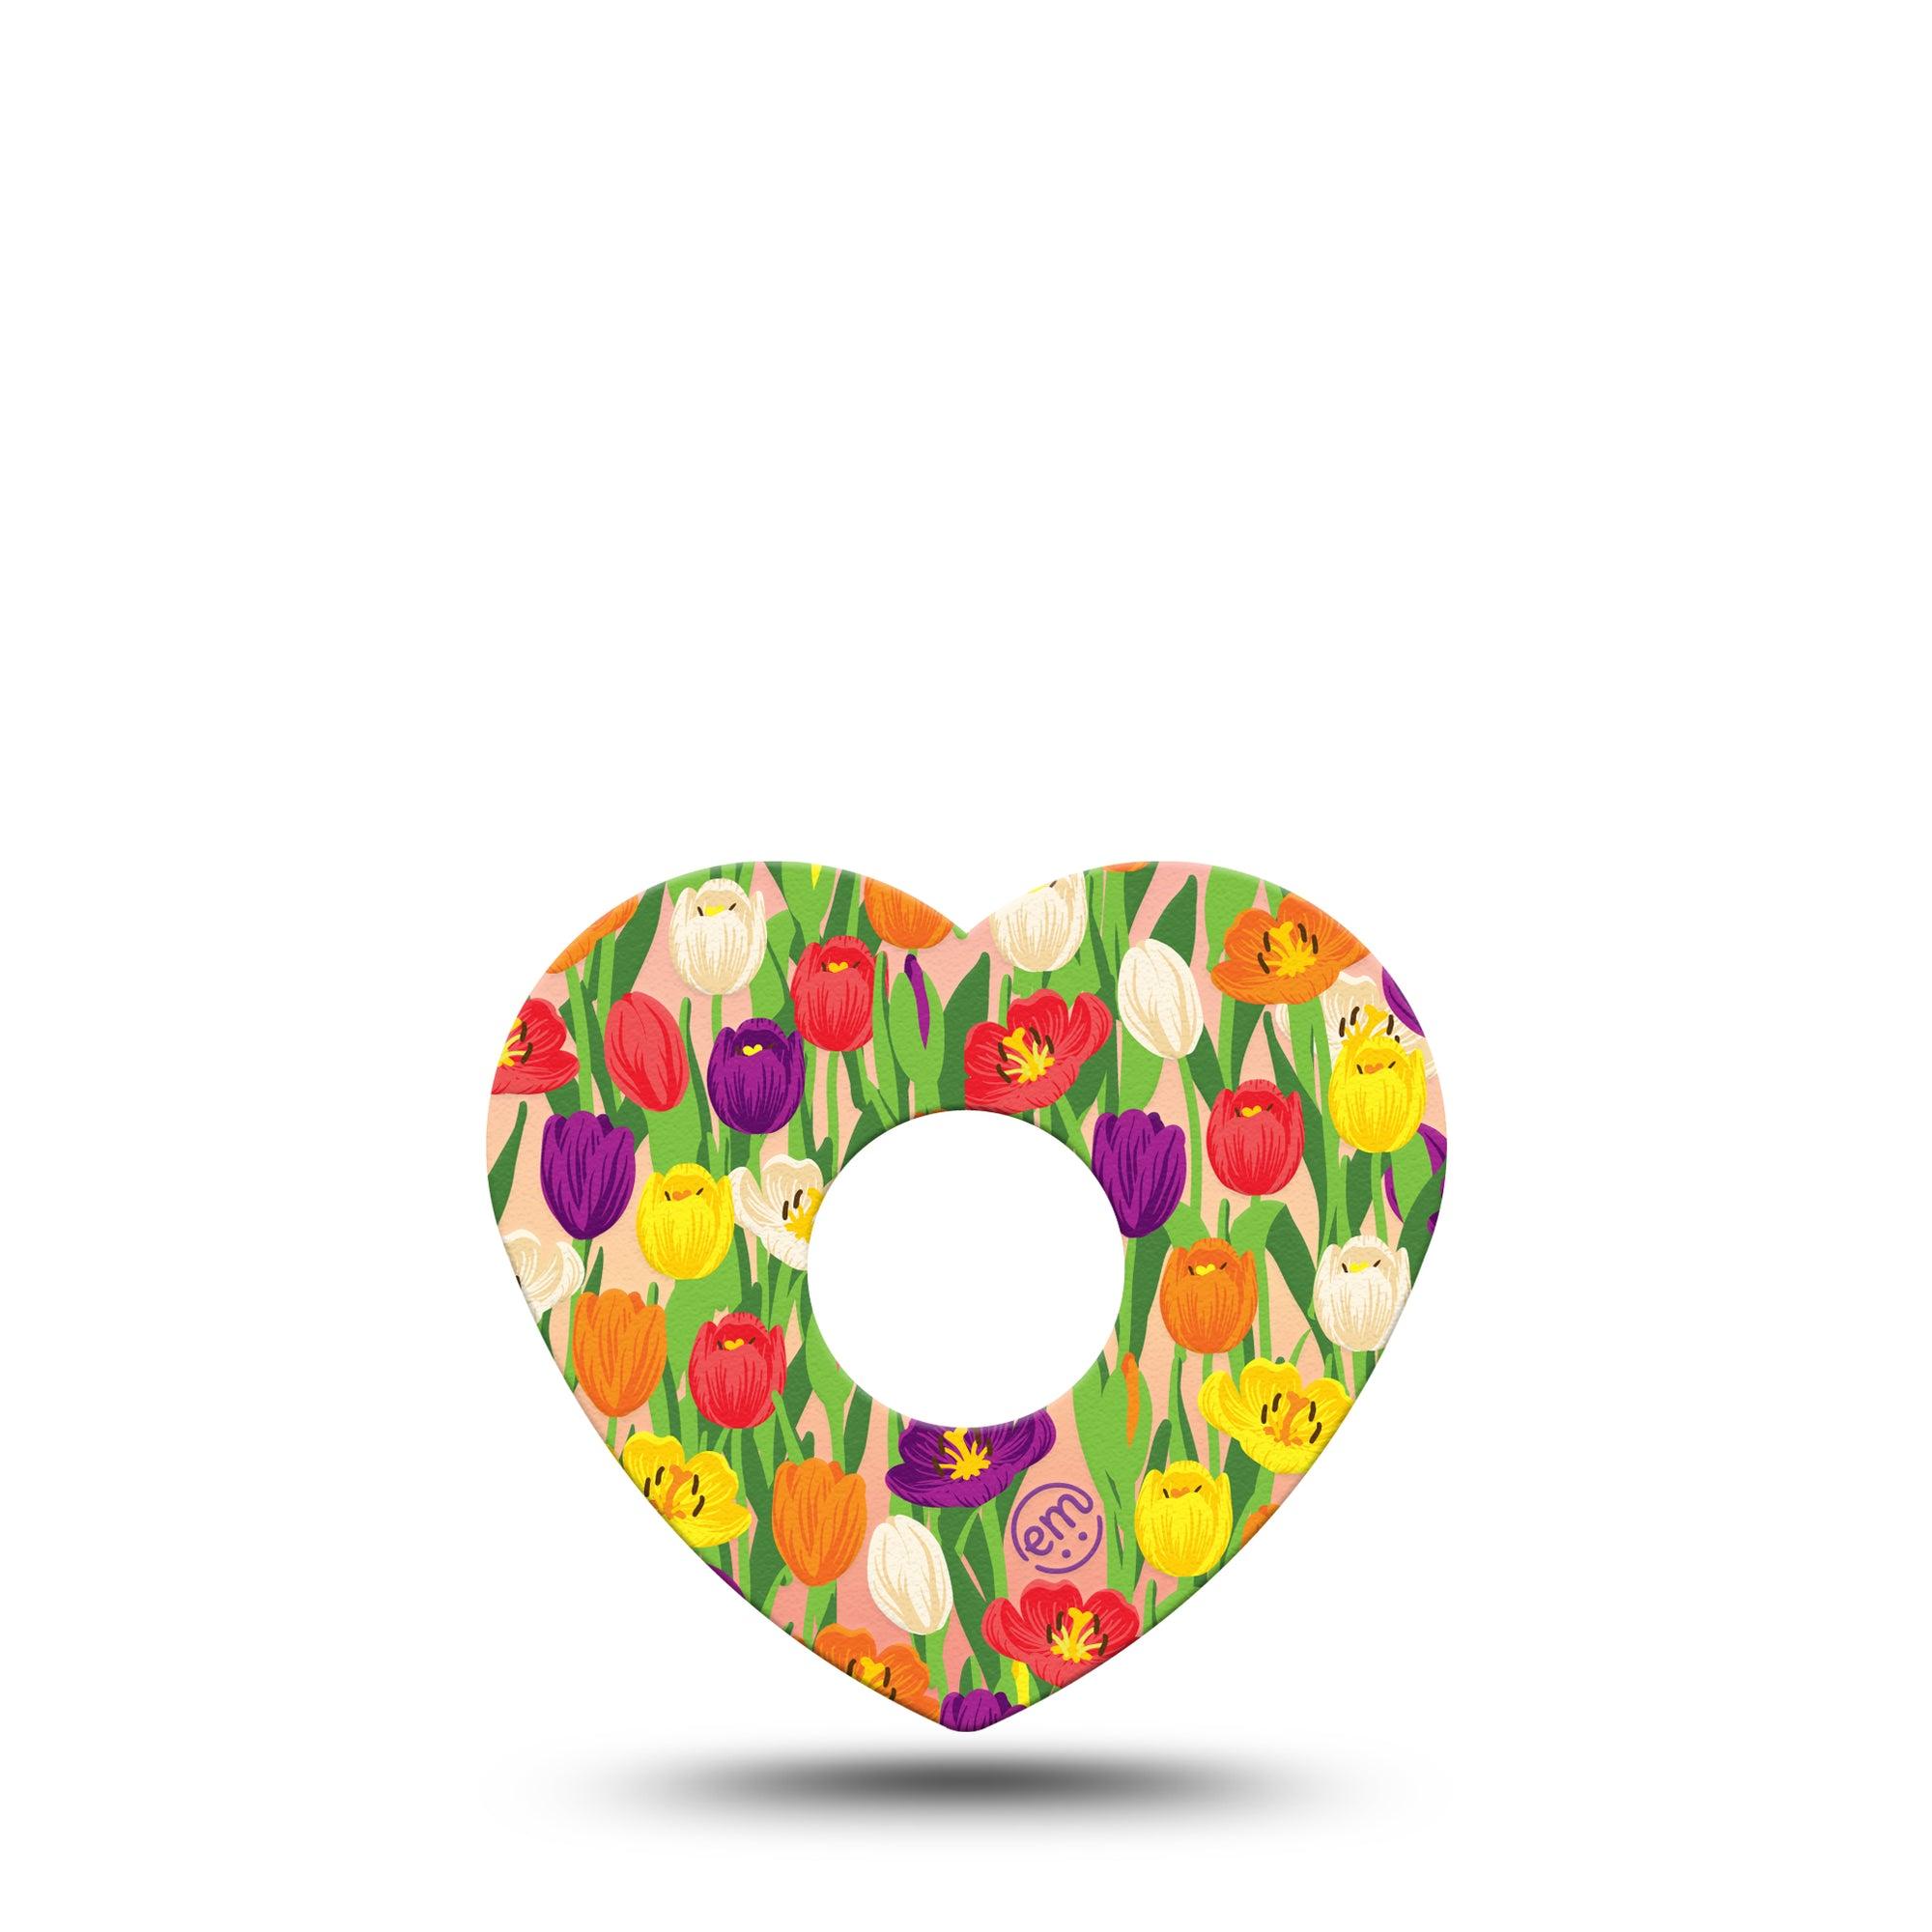 ExpressionMed Tulips Heart Libre 3 Tape, Single, Colorful Spring Florals Themed, CGM Plaster Patch Design